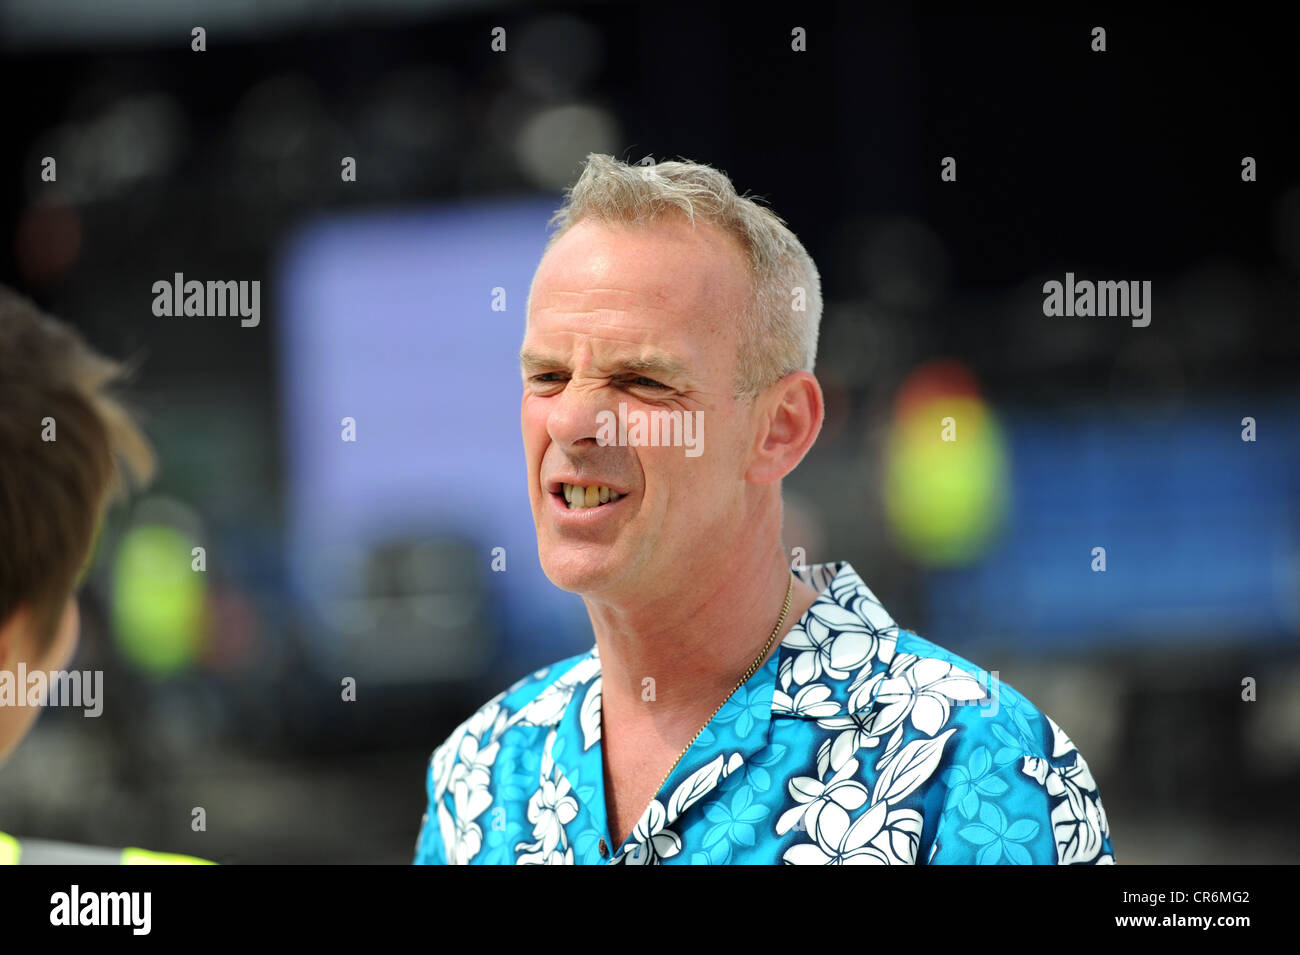 Musician and dj Norman Cook aka Fat Boy Slim speaks to the press ahead of his Big Beach Bootique 5 gig at The Amex  stadium Stock Photo